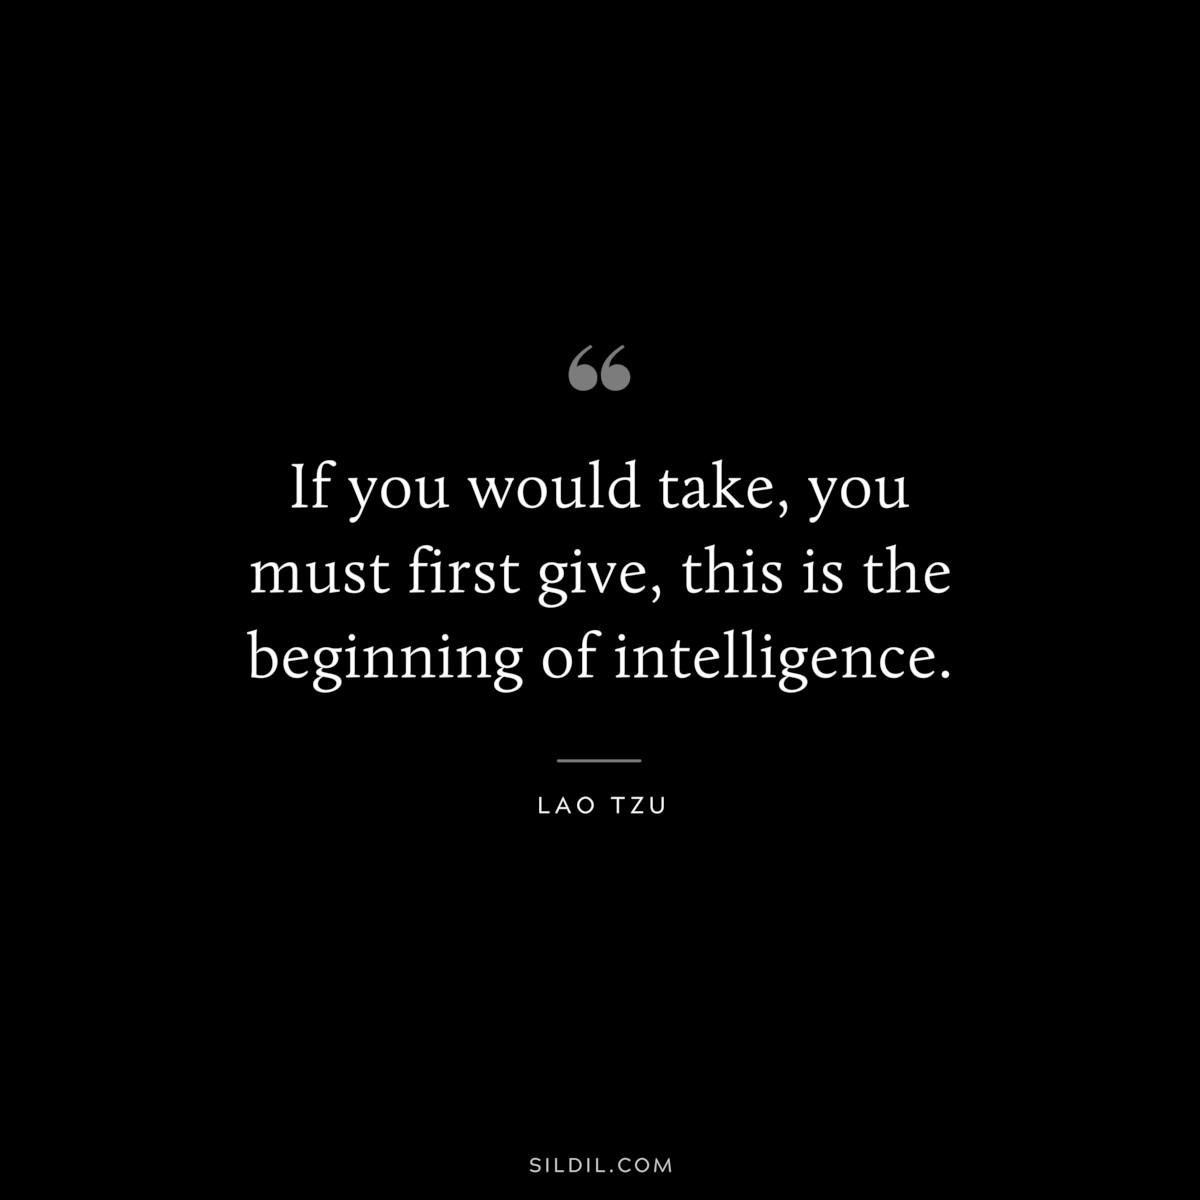 If you would take, you must first give, this is the beginning of intelligence. ― Lao Tzu